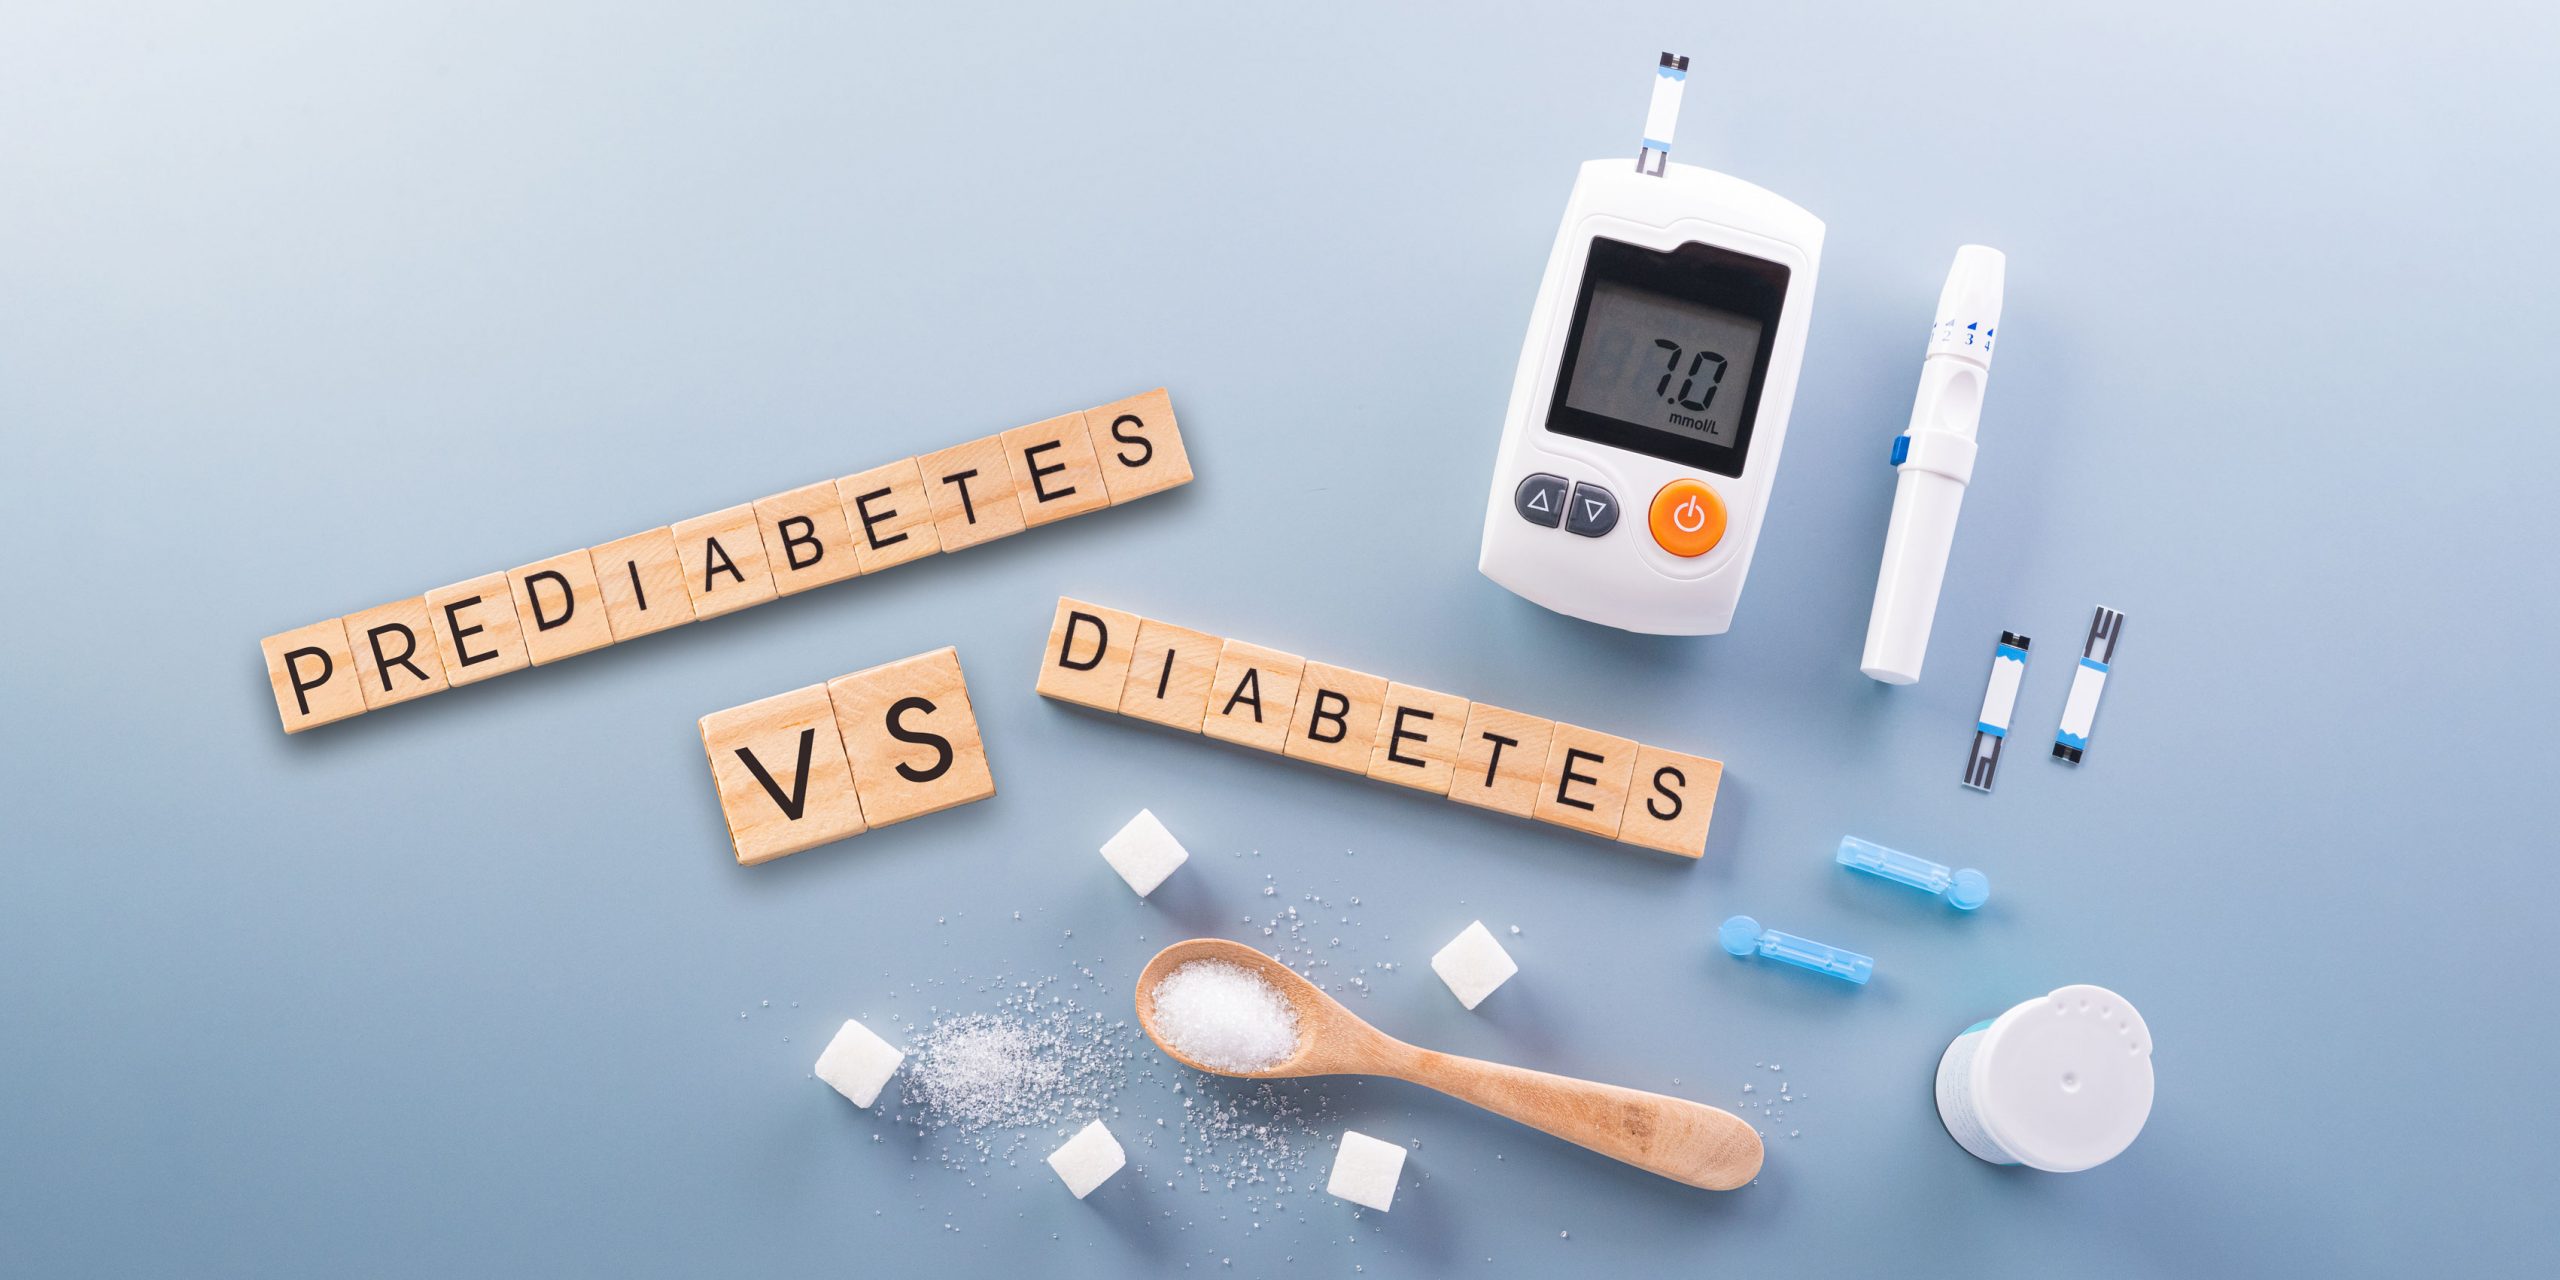 12 Prediabetes vs Diabetes What Is The Difference